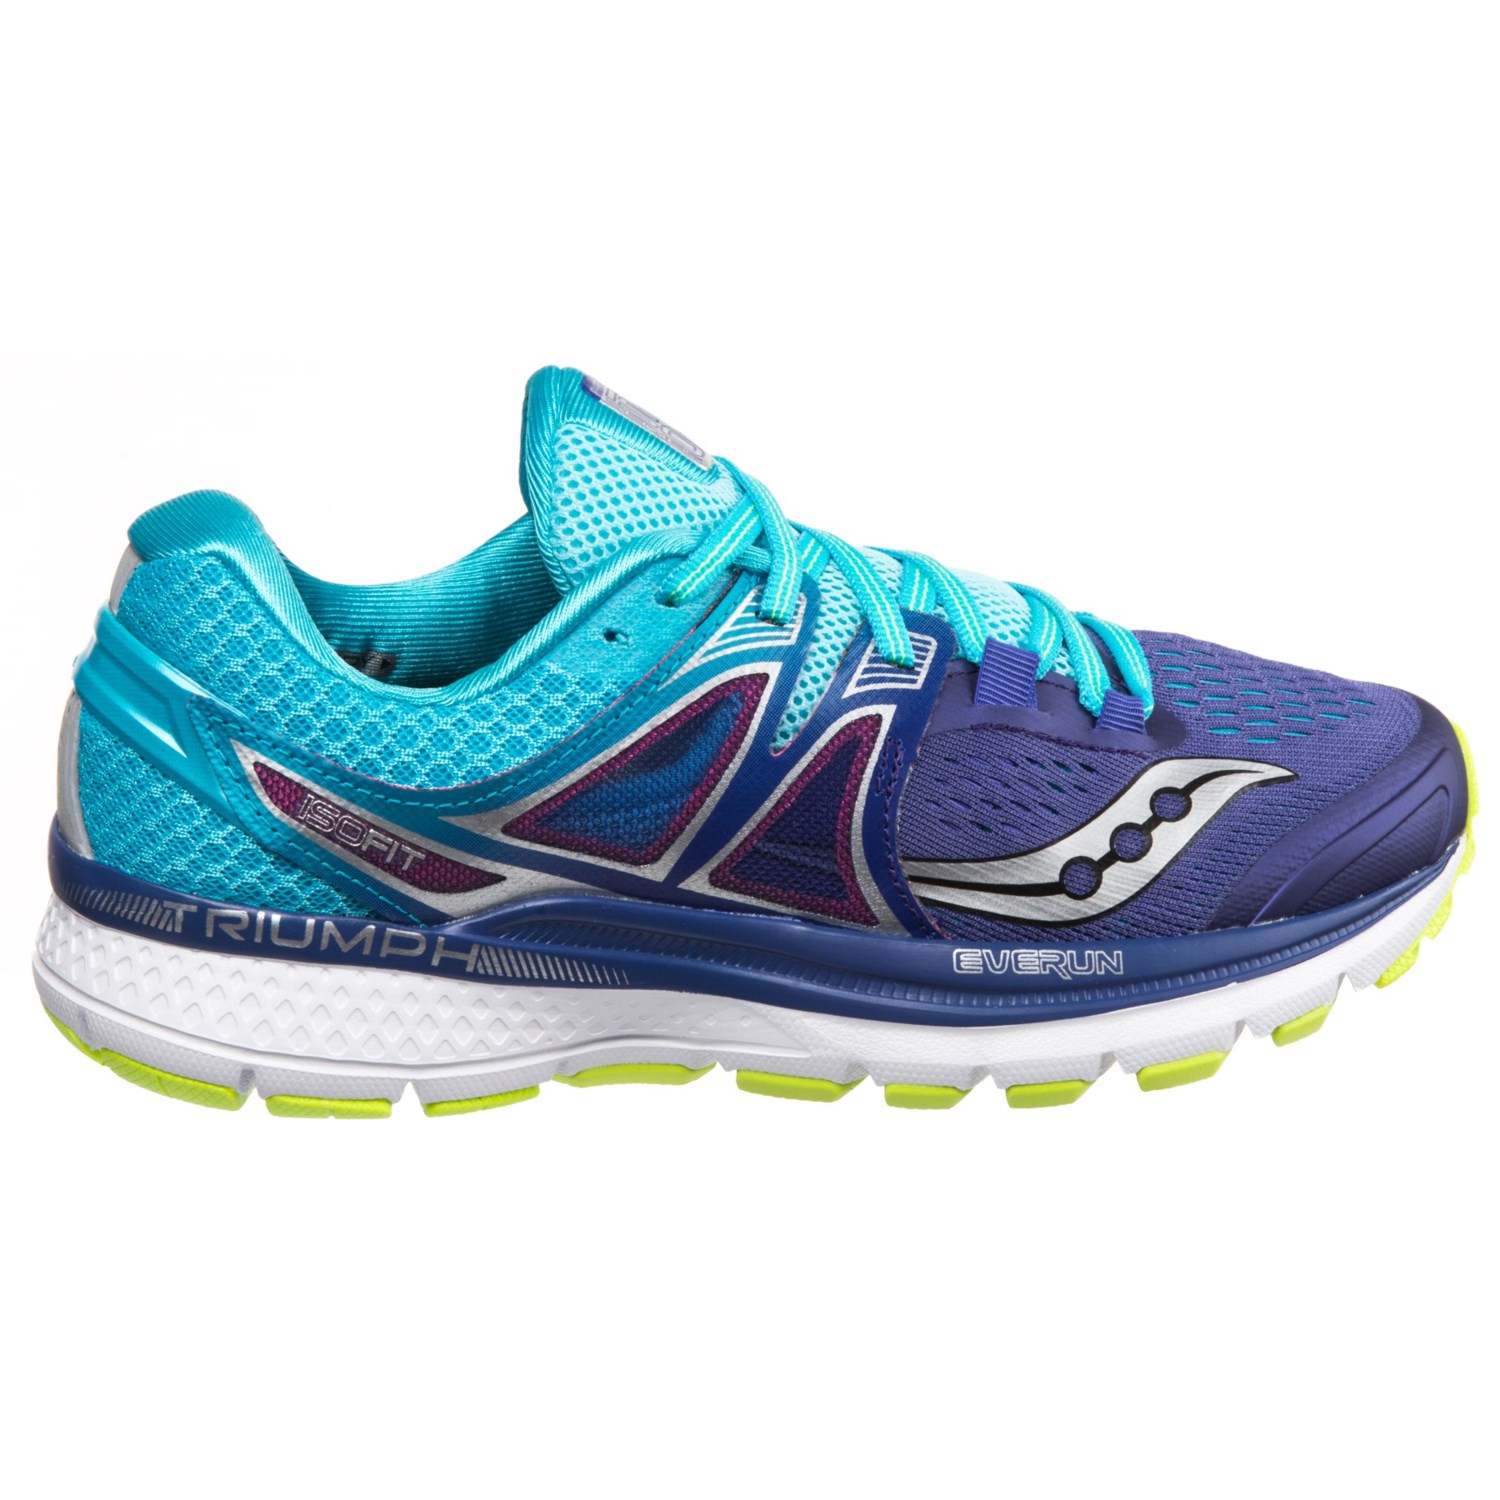 Saucony Triumph Iso 3 Running Shoes (For Women) - Save 54%